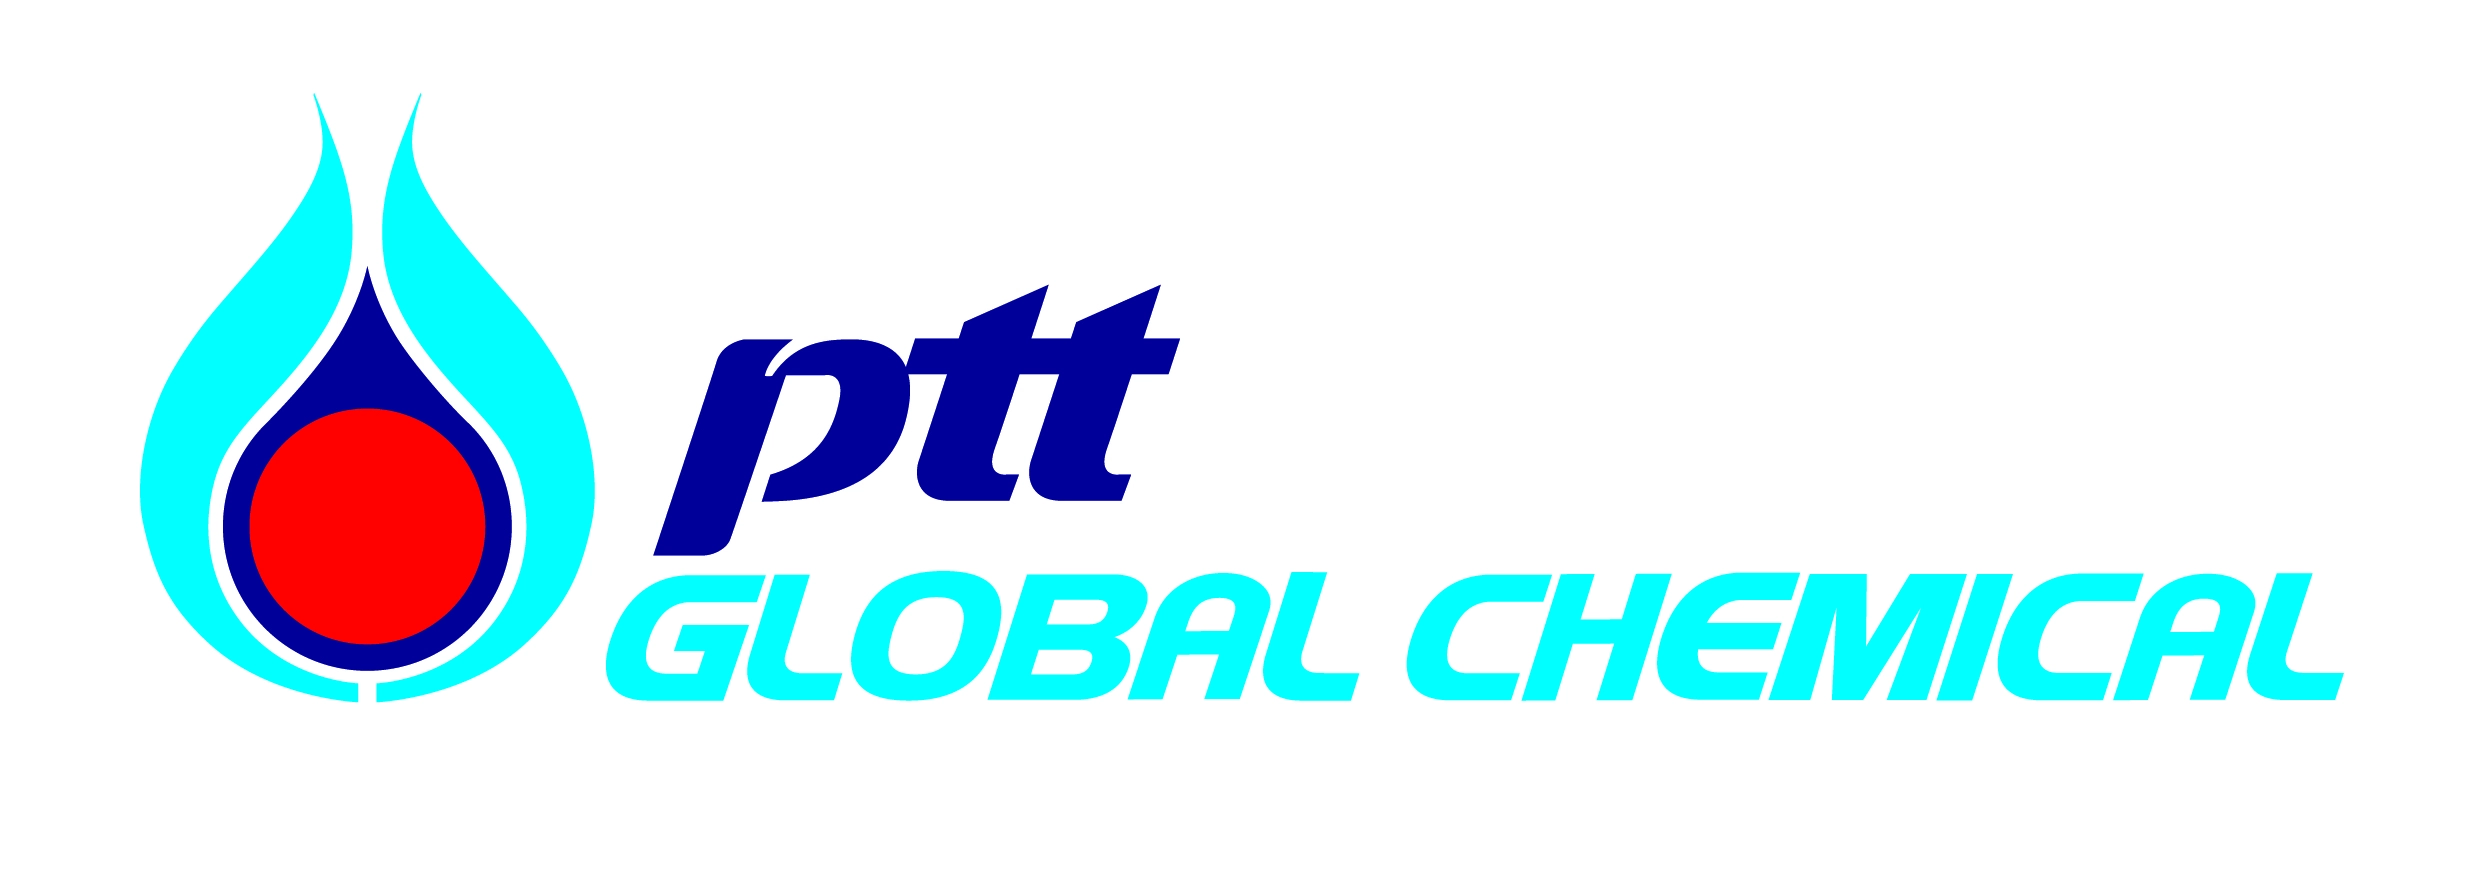 PTT Global Chemical Public Company Limited